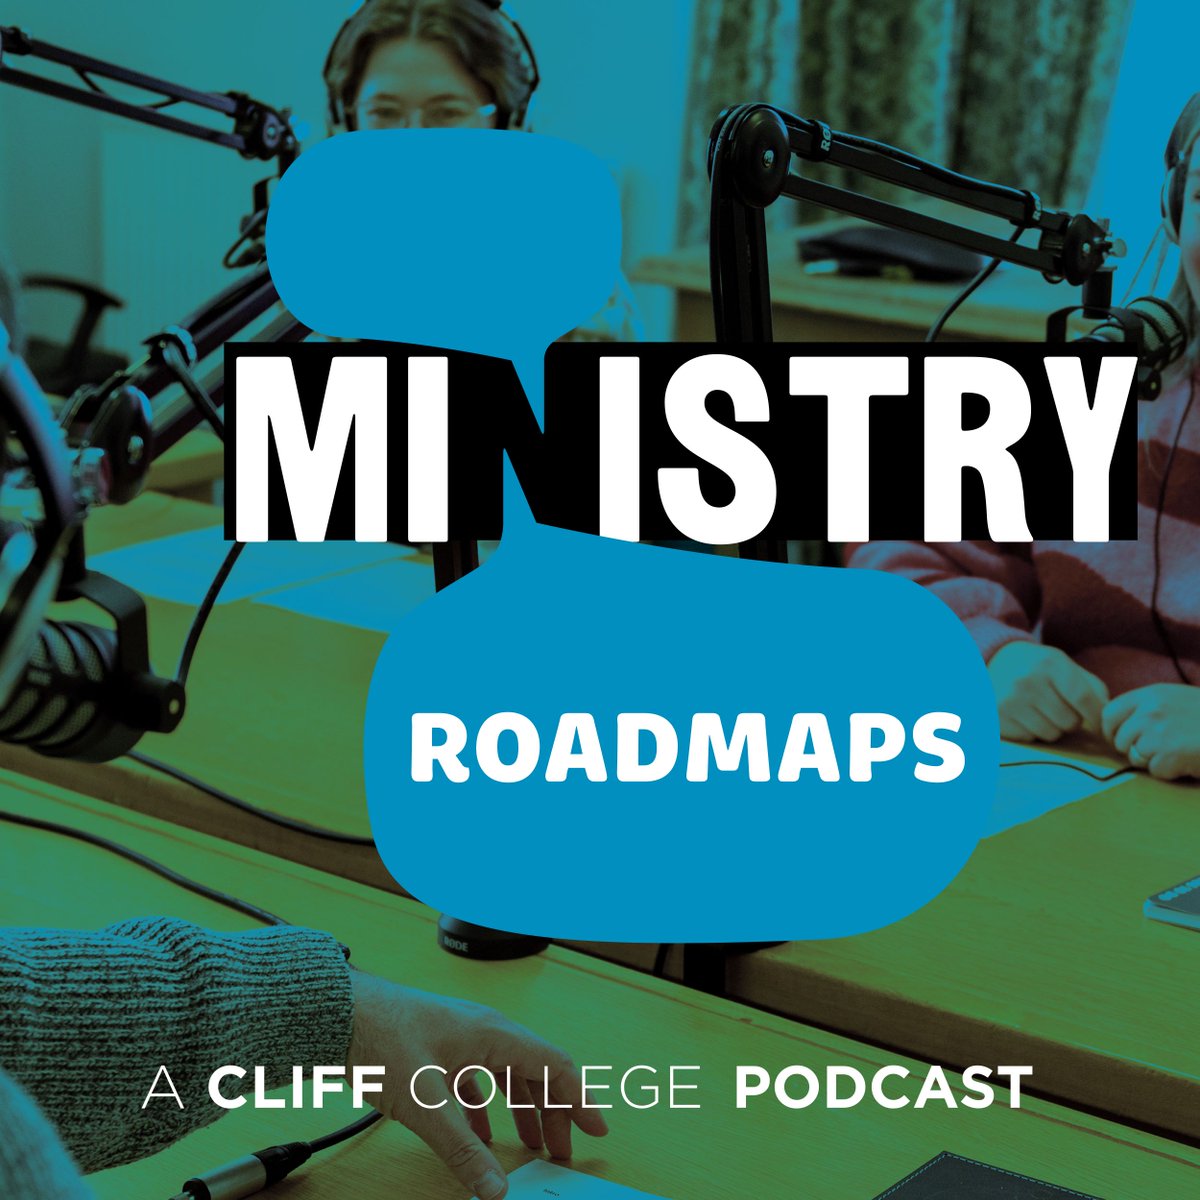 Have you listened to #MinistryRoadmaps yet? All five of our interview episodes have been released; listen on YouTube or wherever you get your podcasts. Which stories and ministry tips have impacted you the most? cliffcollege.ac.uk/news-events/mi…